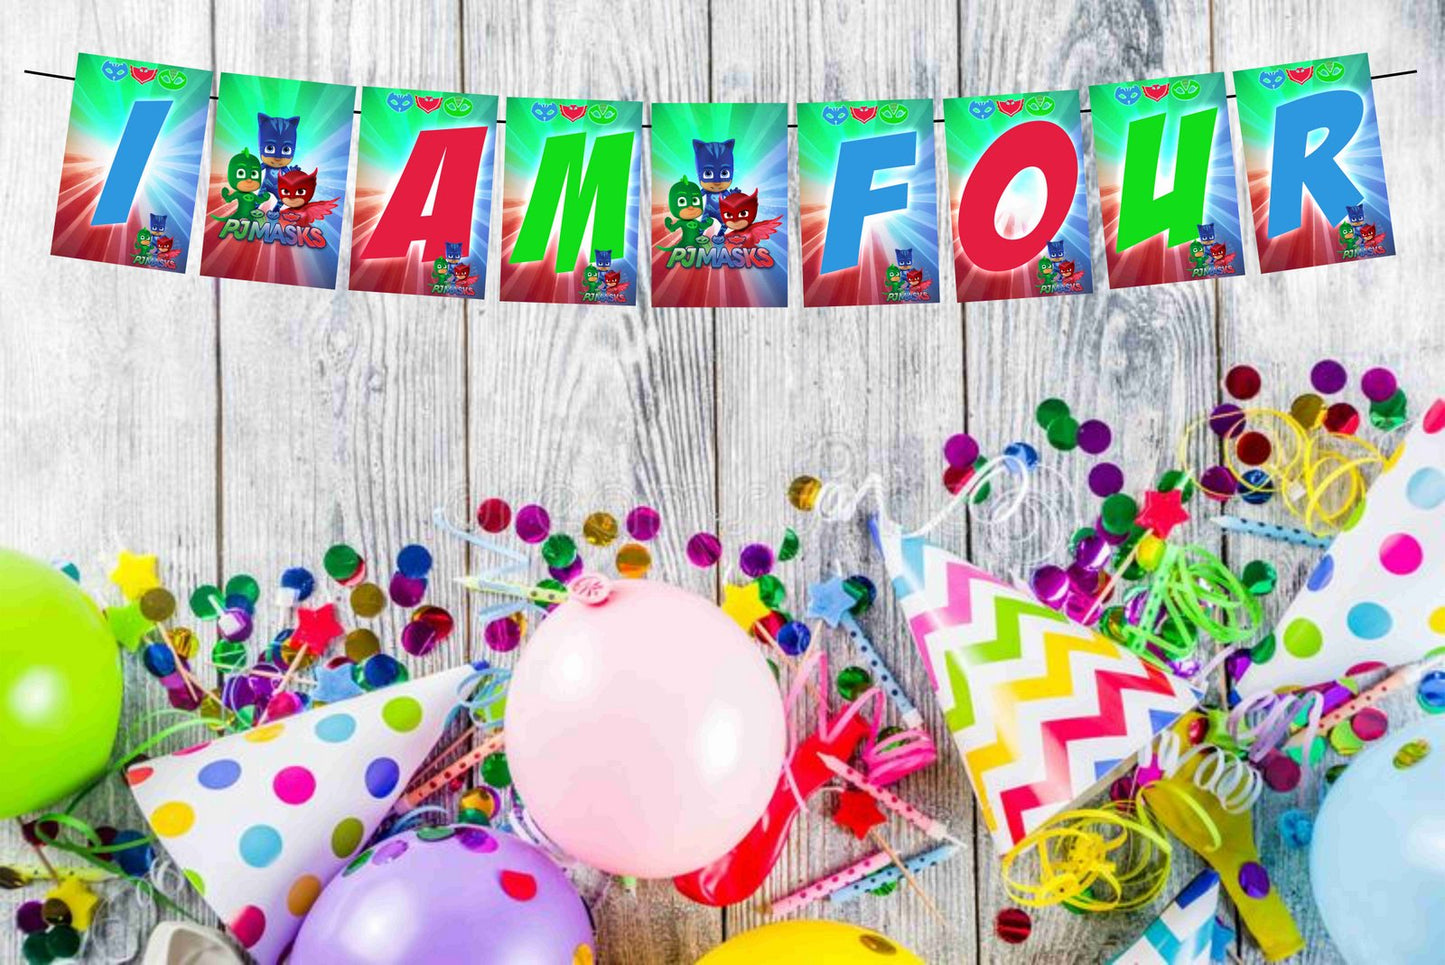 PJ Mask Theme I Am Four 4th Birthday Banner for Photo Shoot Backdrop and Theme Party